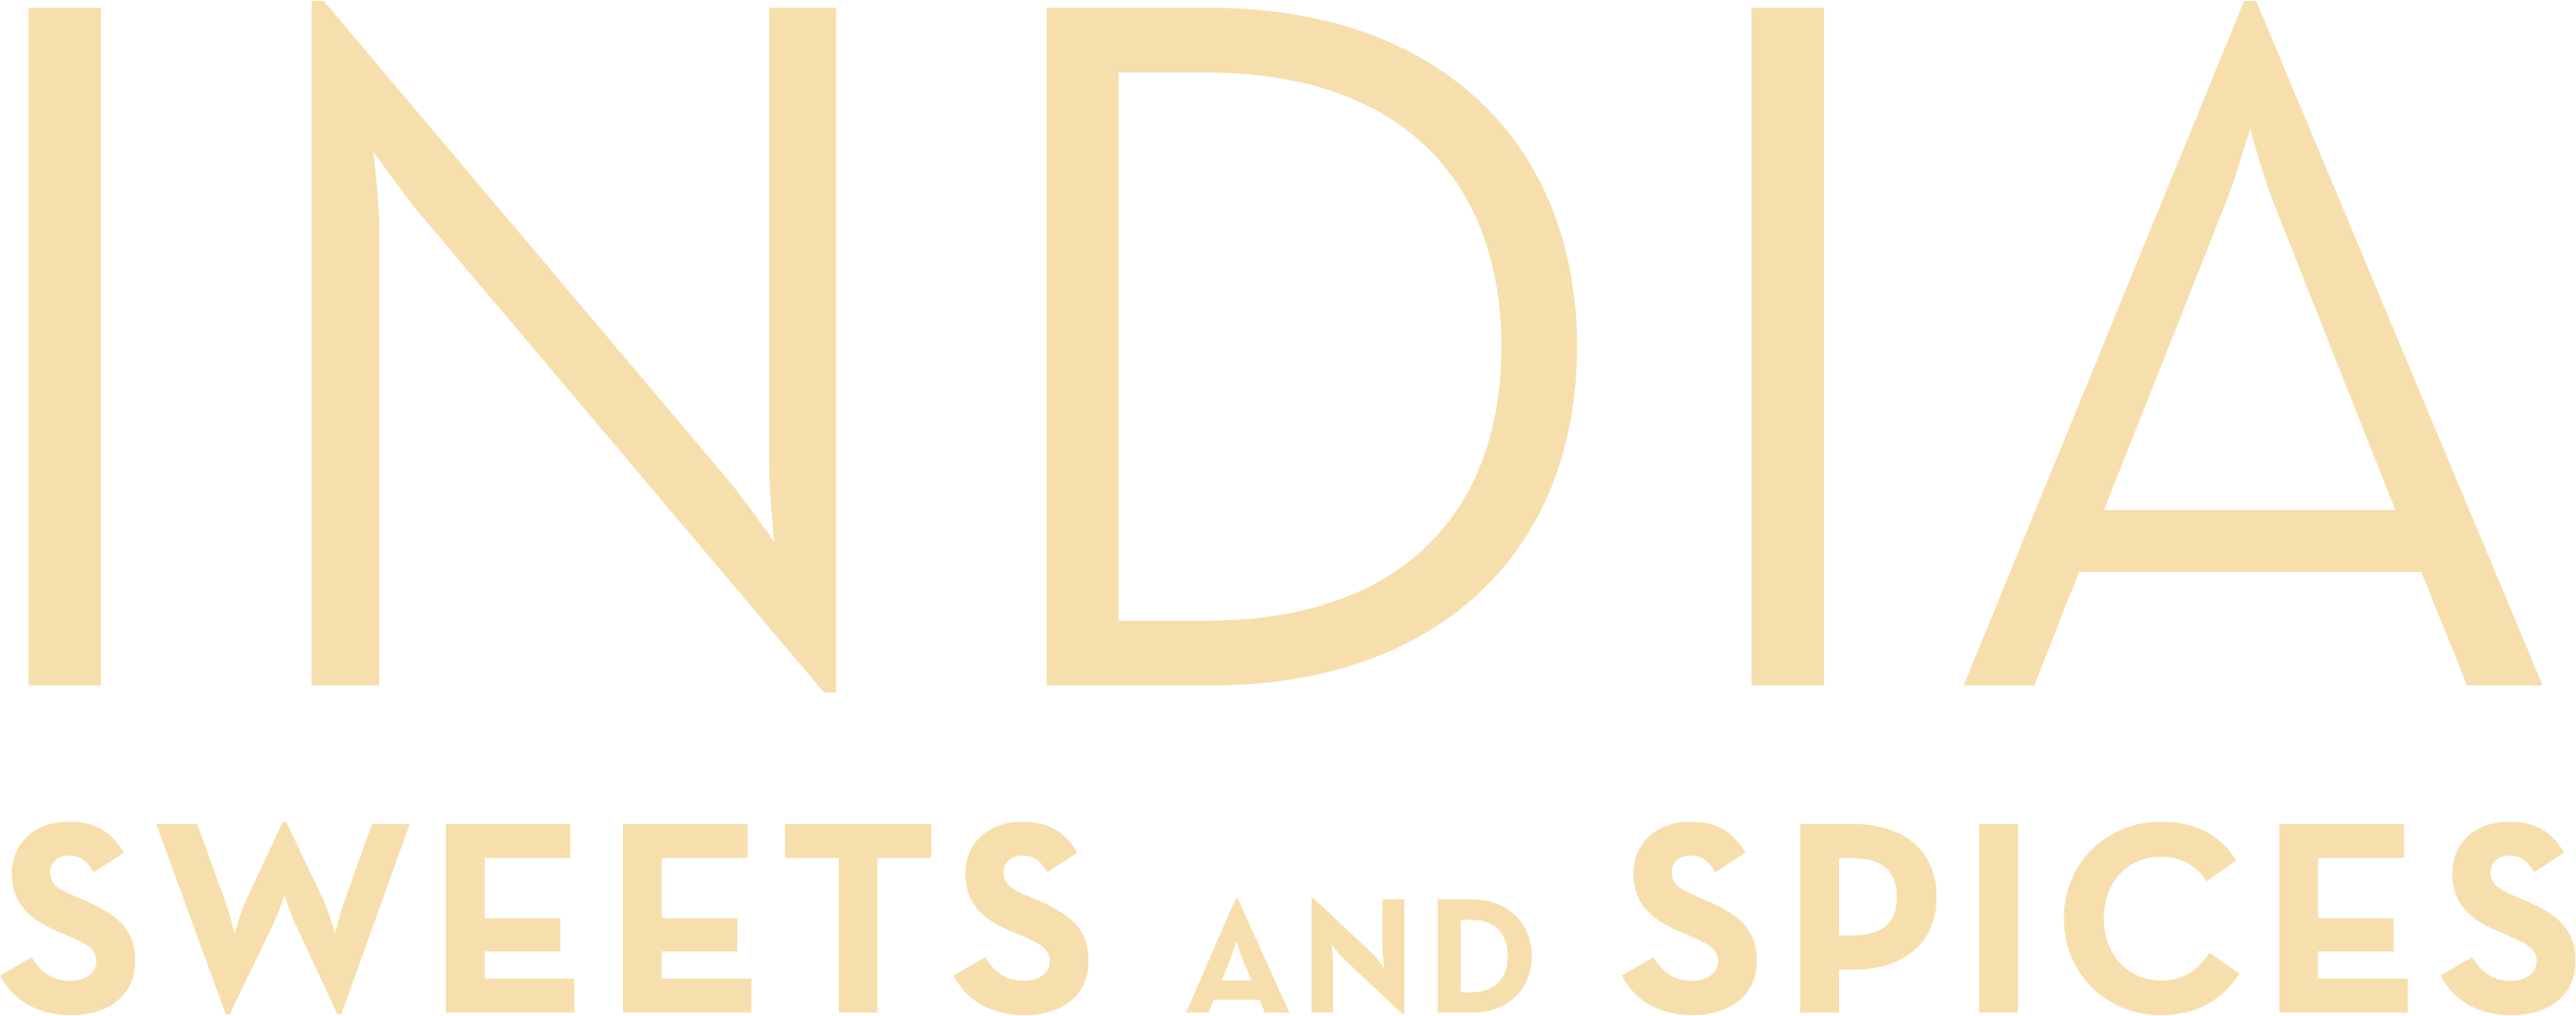 India Sweets and Spices logo